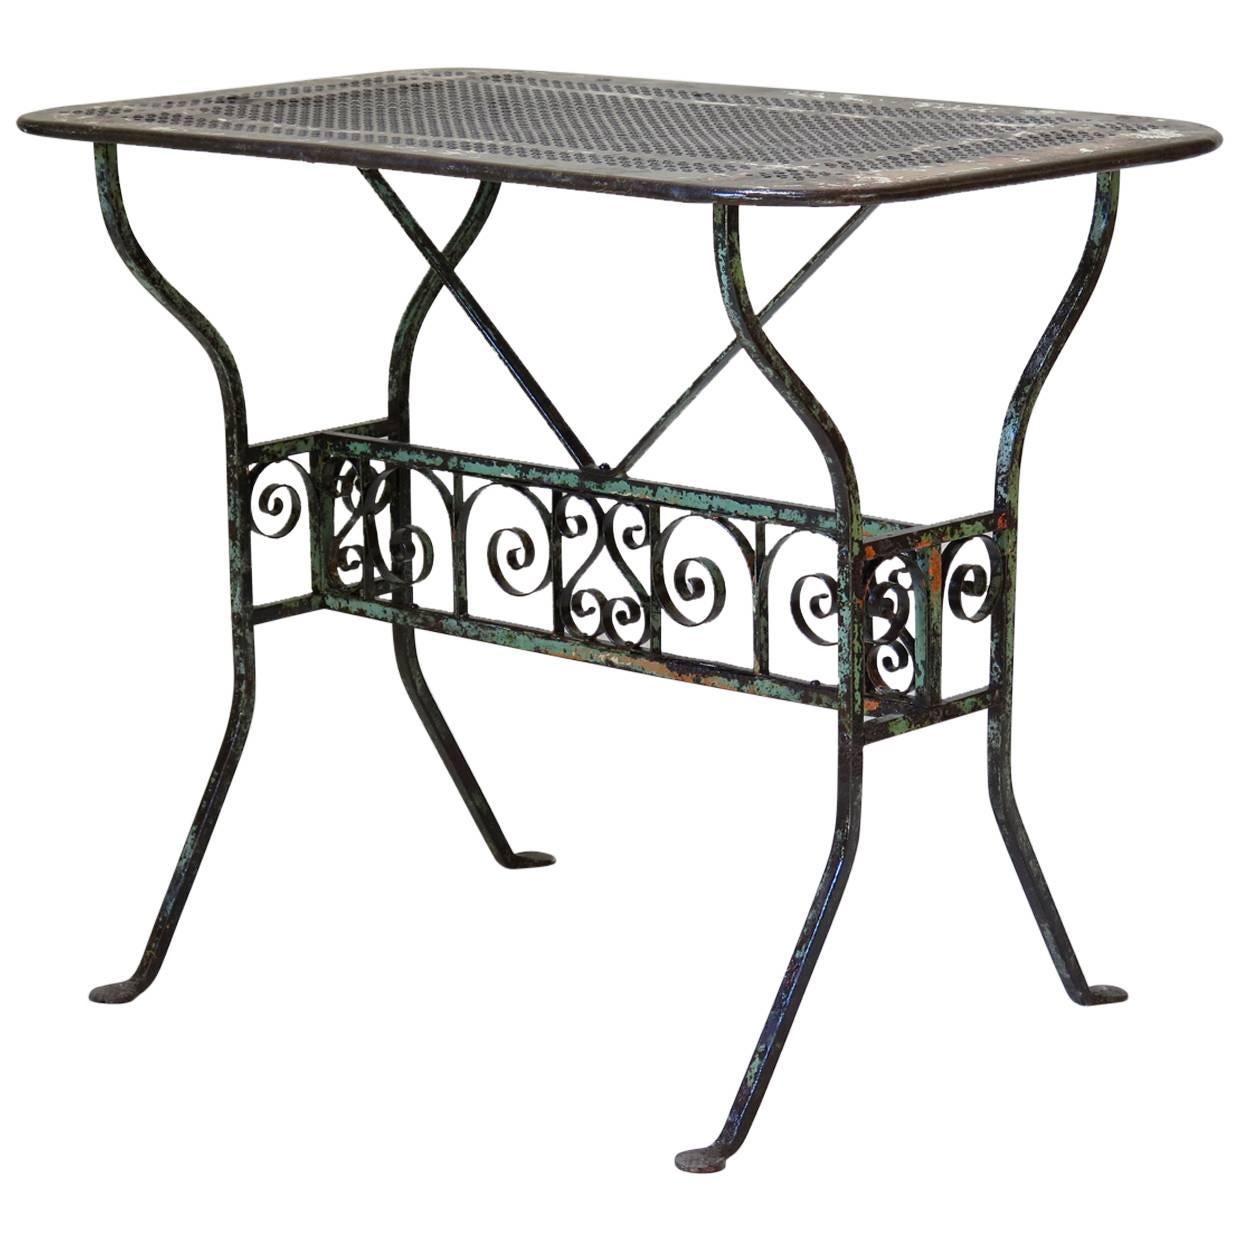 Elegant 1920s Painted Iron Table from Arras, France